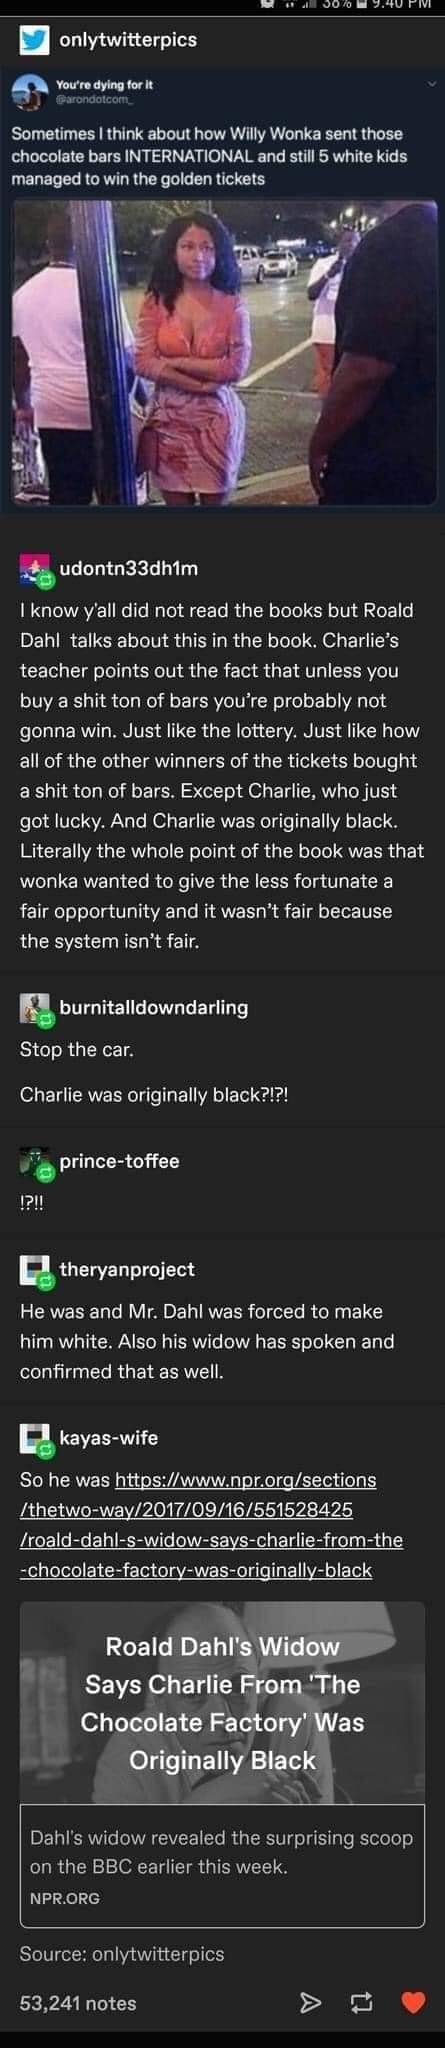 so it looks like charlie was originally black, charlie and the chocolate factory, willy wonka